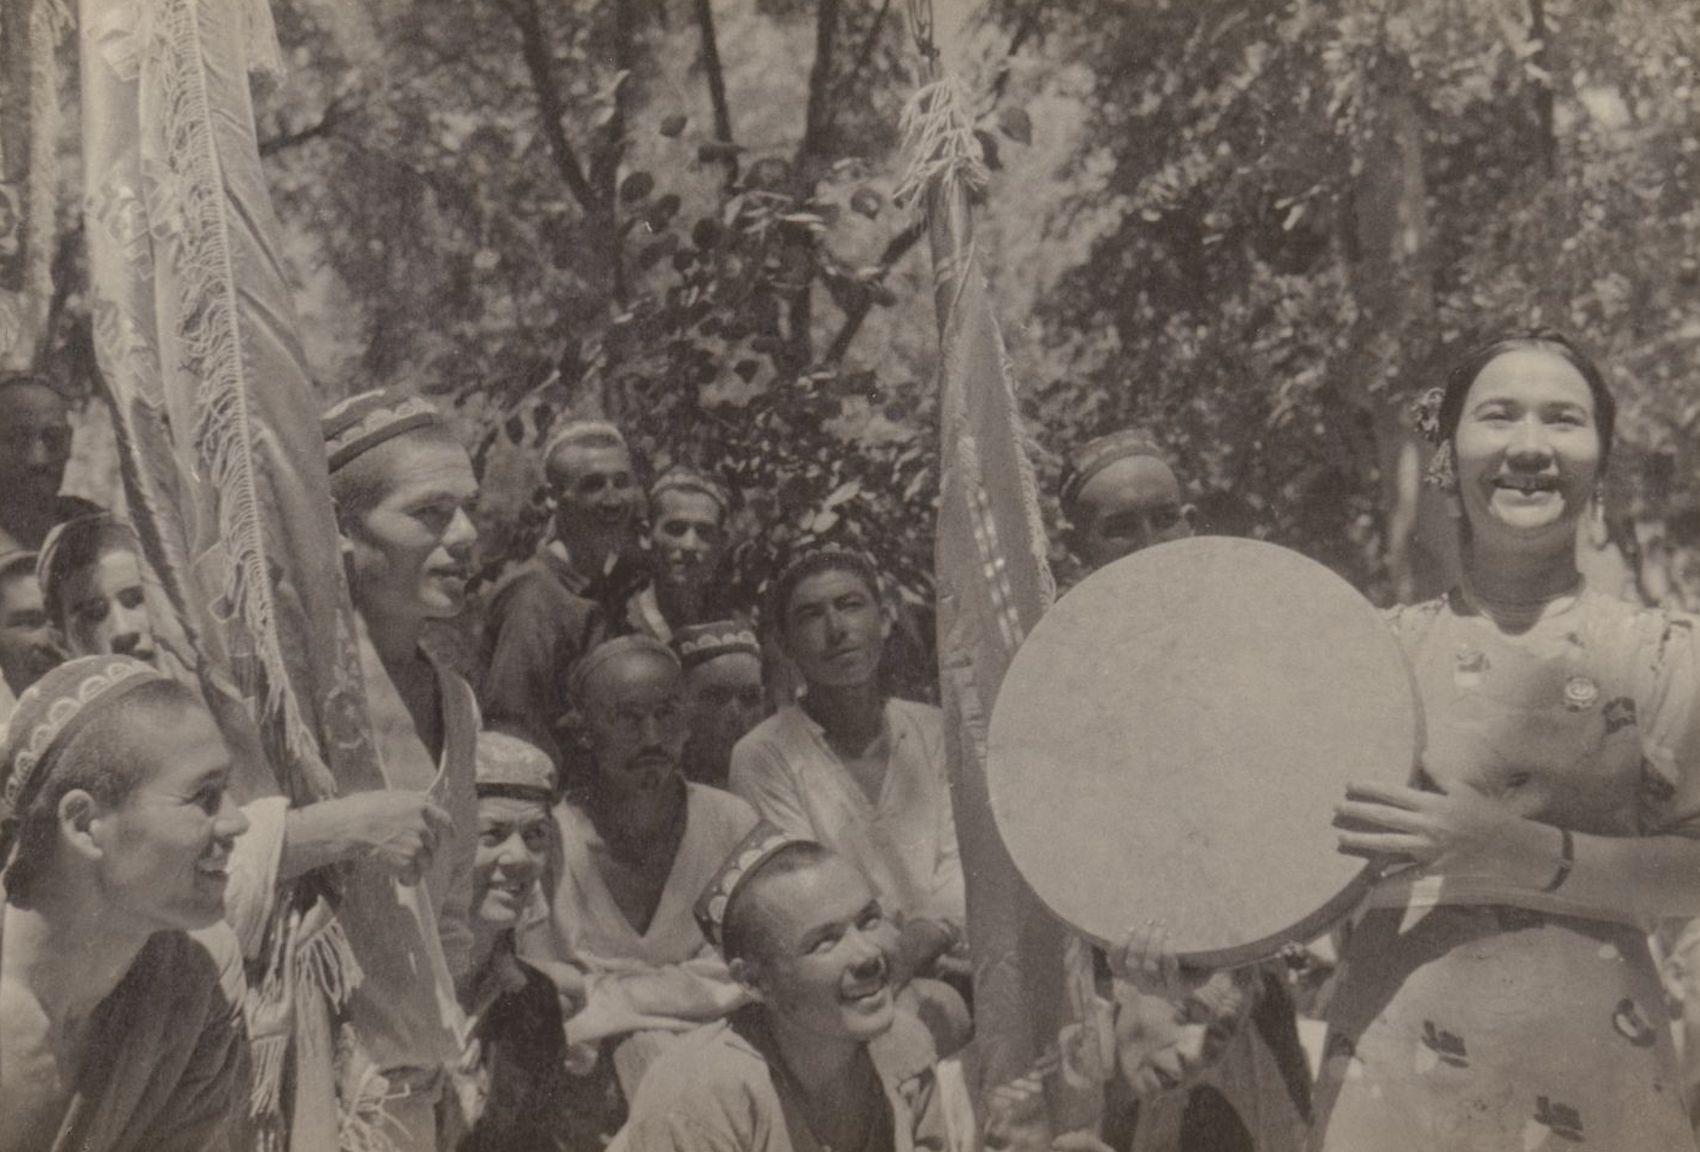 Sarymsakova, smiling, sings and holds drum; a group of smiling workers watch her, some holding banners.